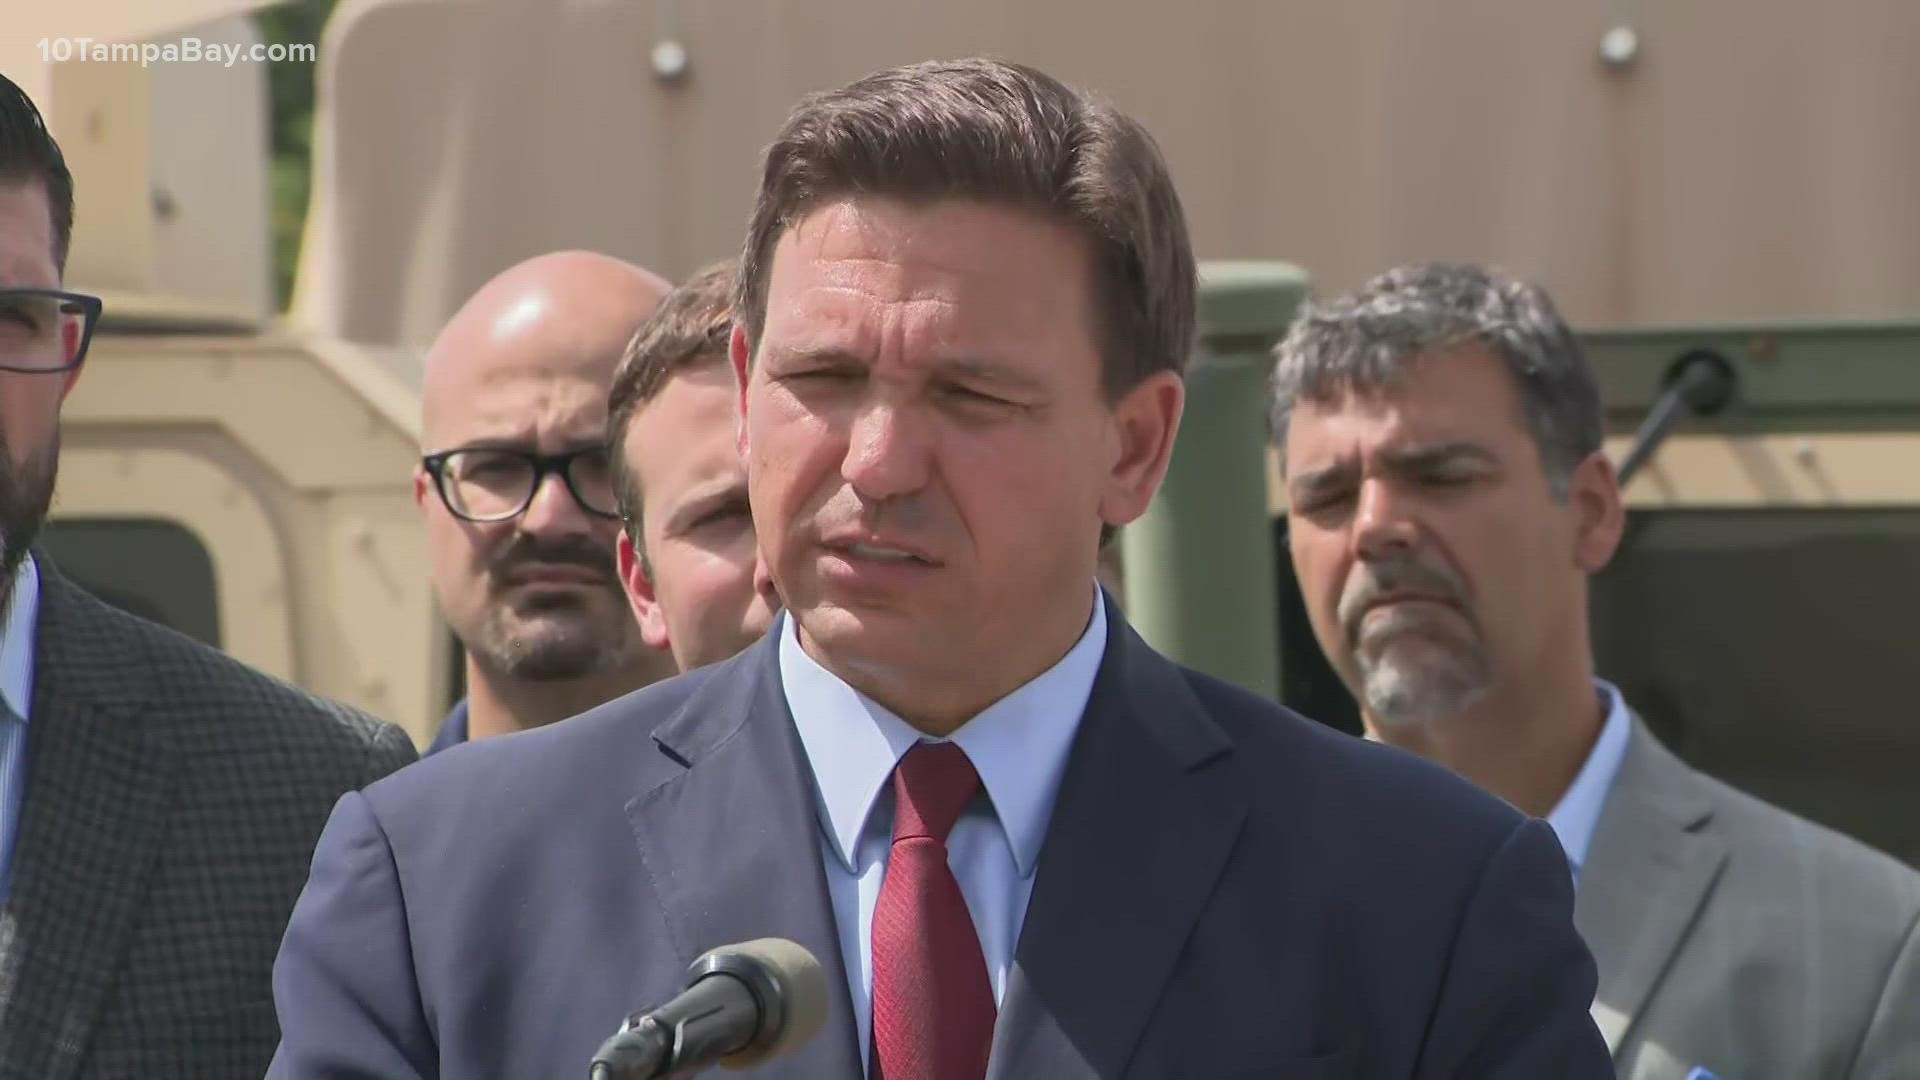 DISCLAIMER: While COVID-19's origin is being investigated, claims by Gov. DeSantis that the virus leaked from a lab are neither confirmed nor verified.